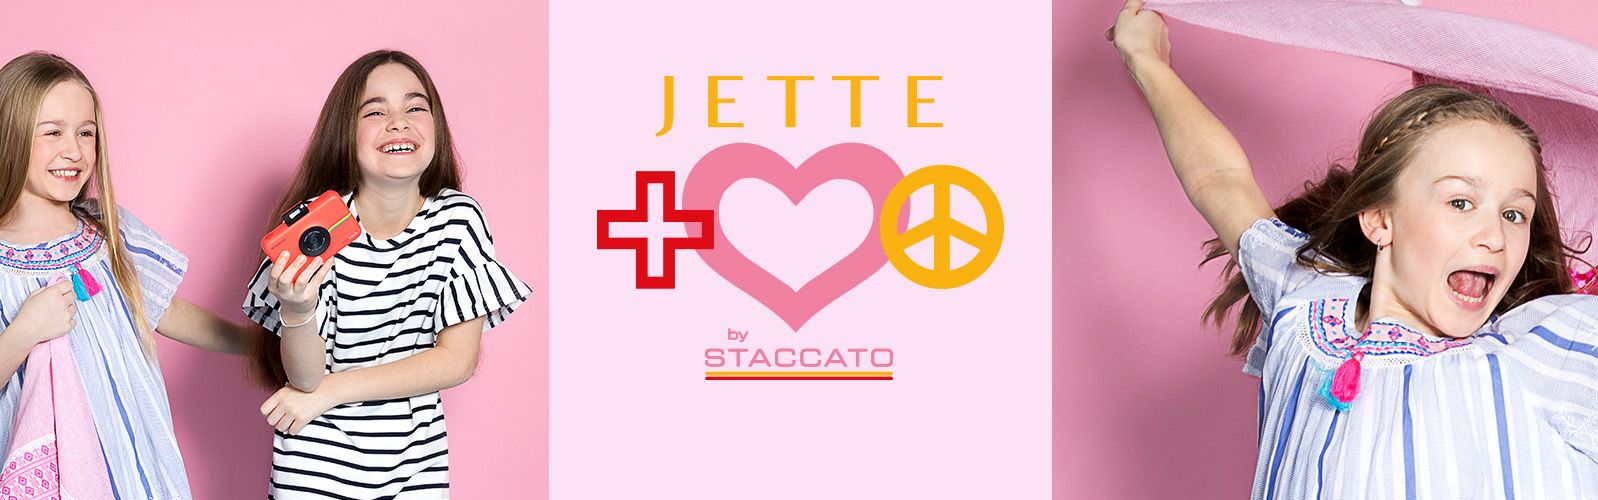 JETTE by Staccato Kindermode